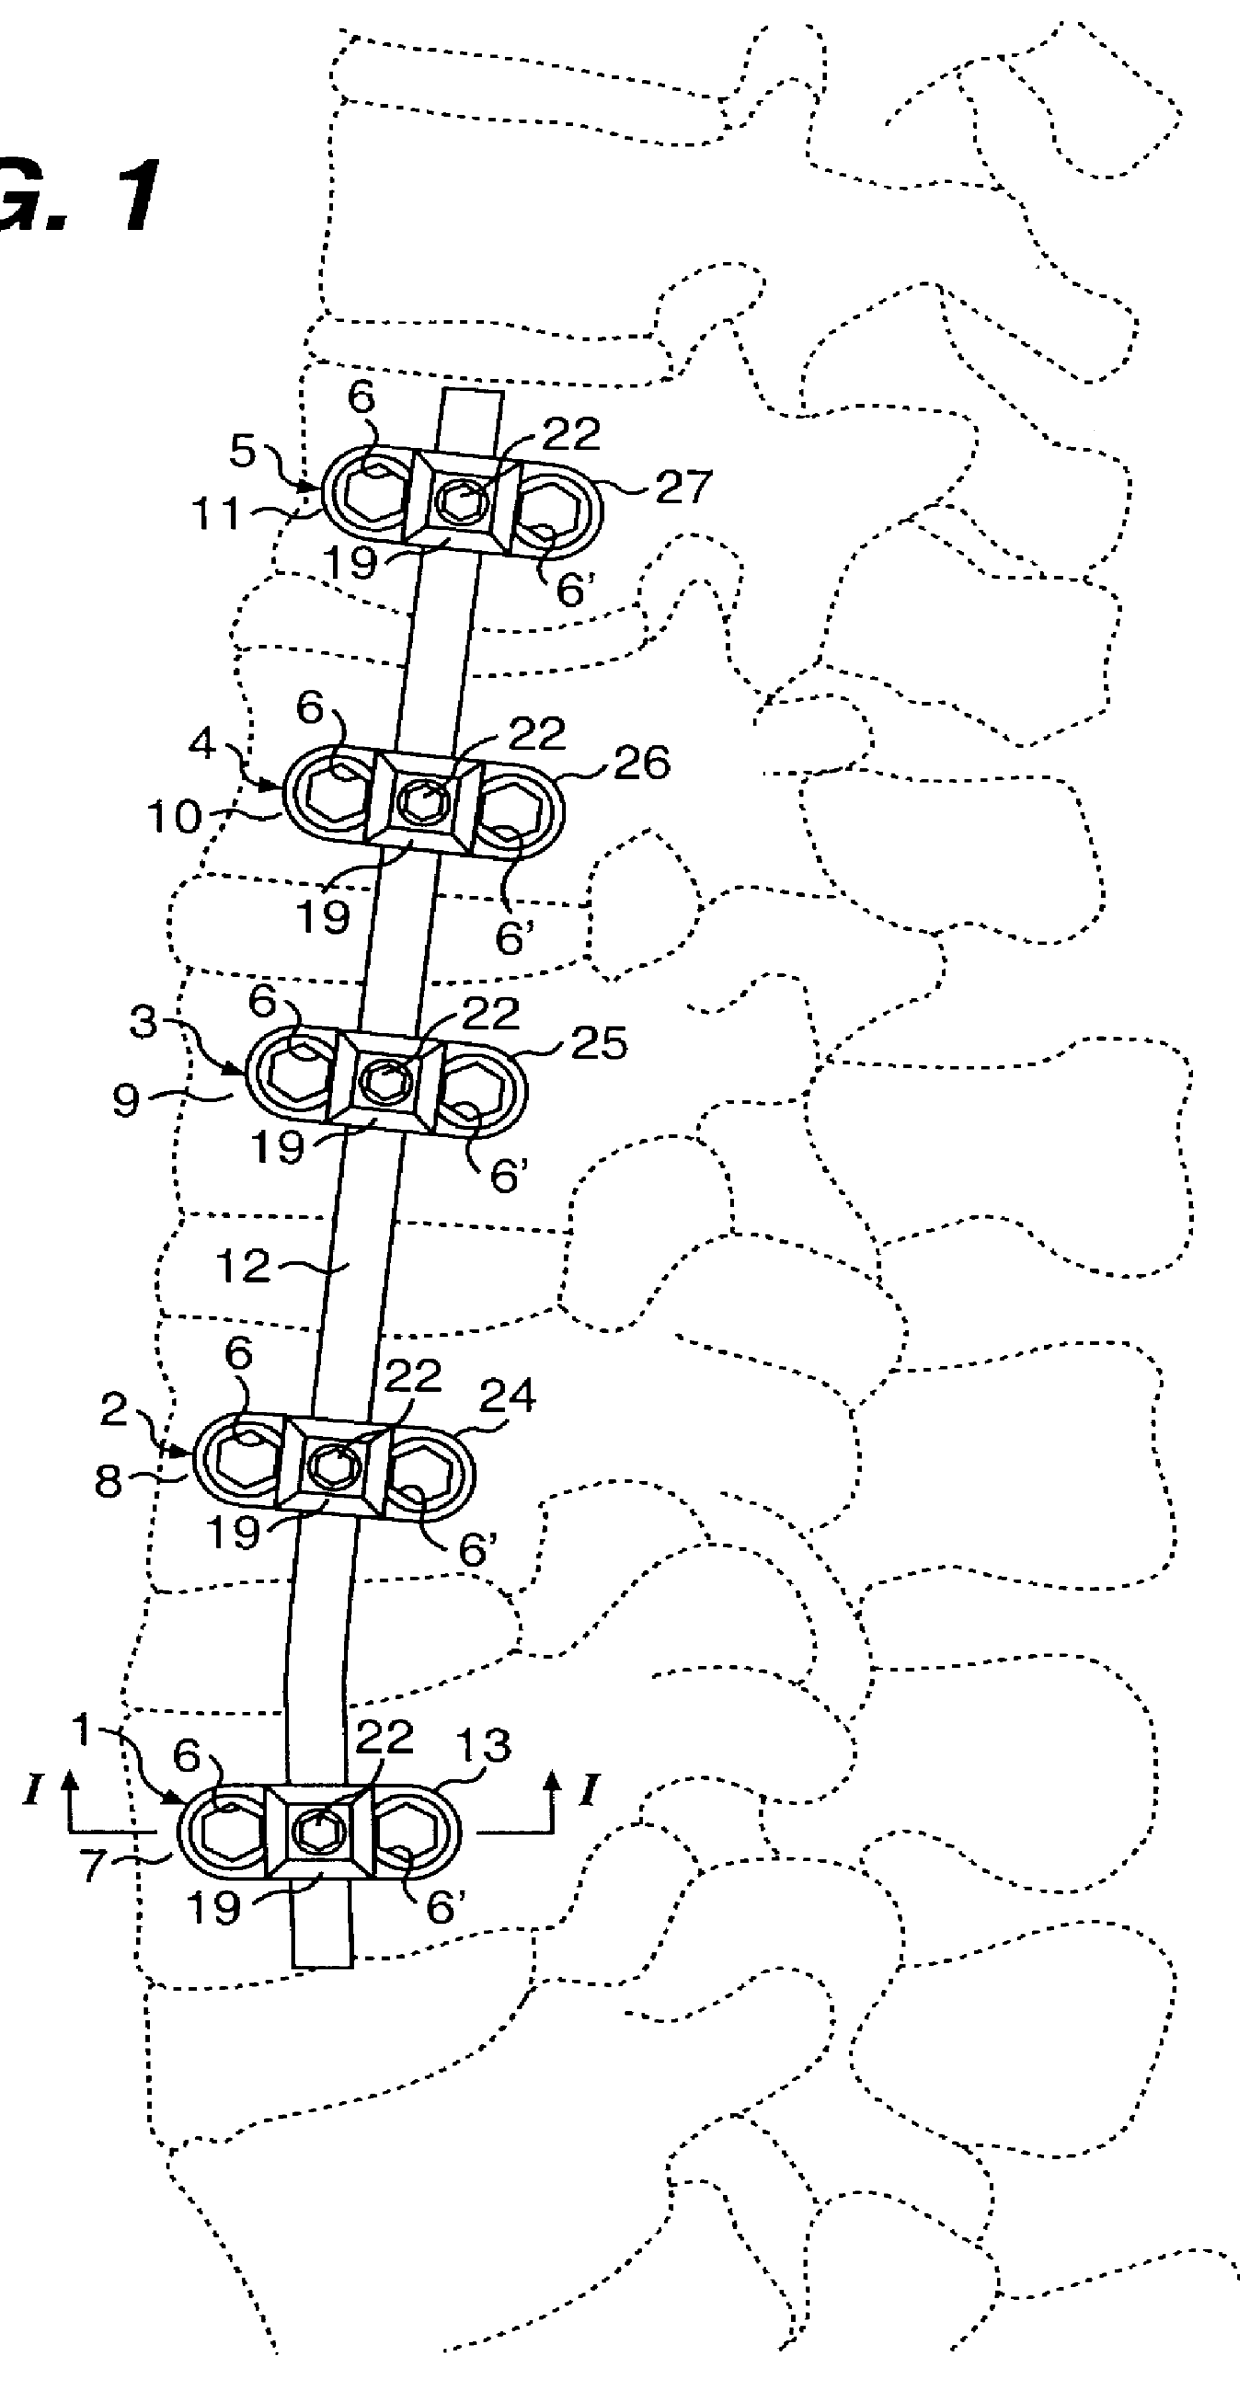 Device and method for correcting and stabilizing a deviating curvature of a spinal column